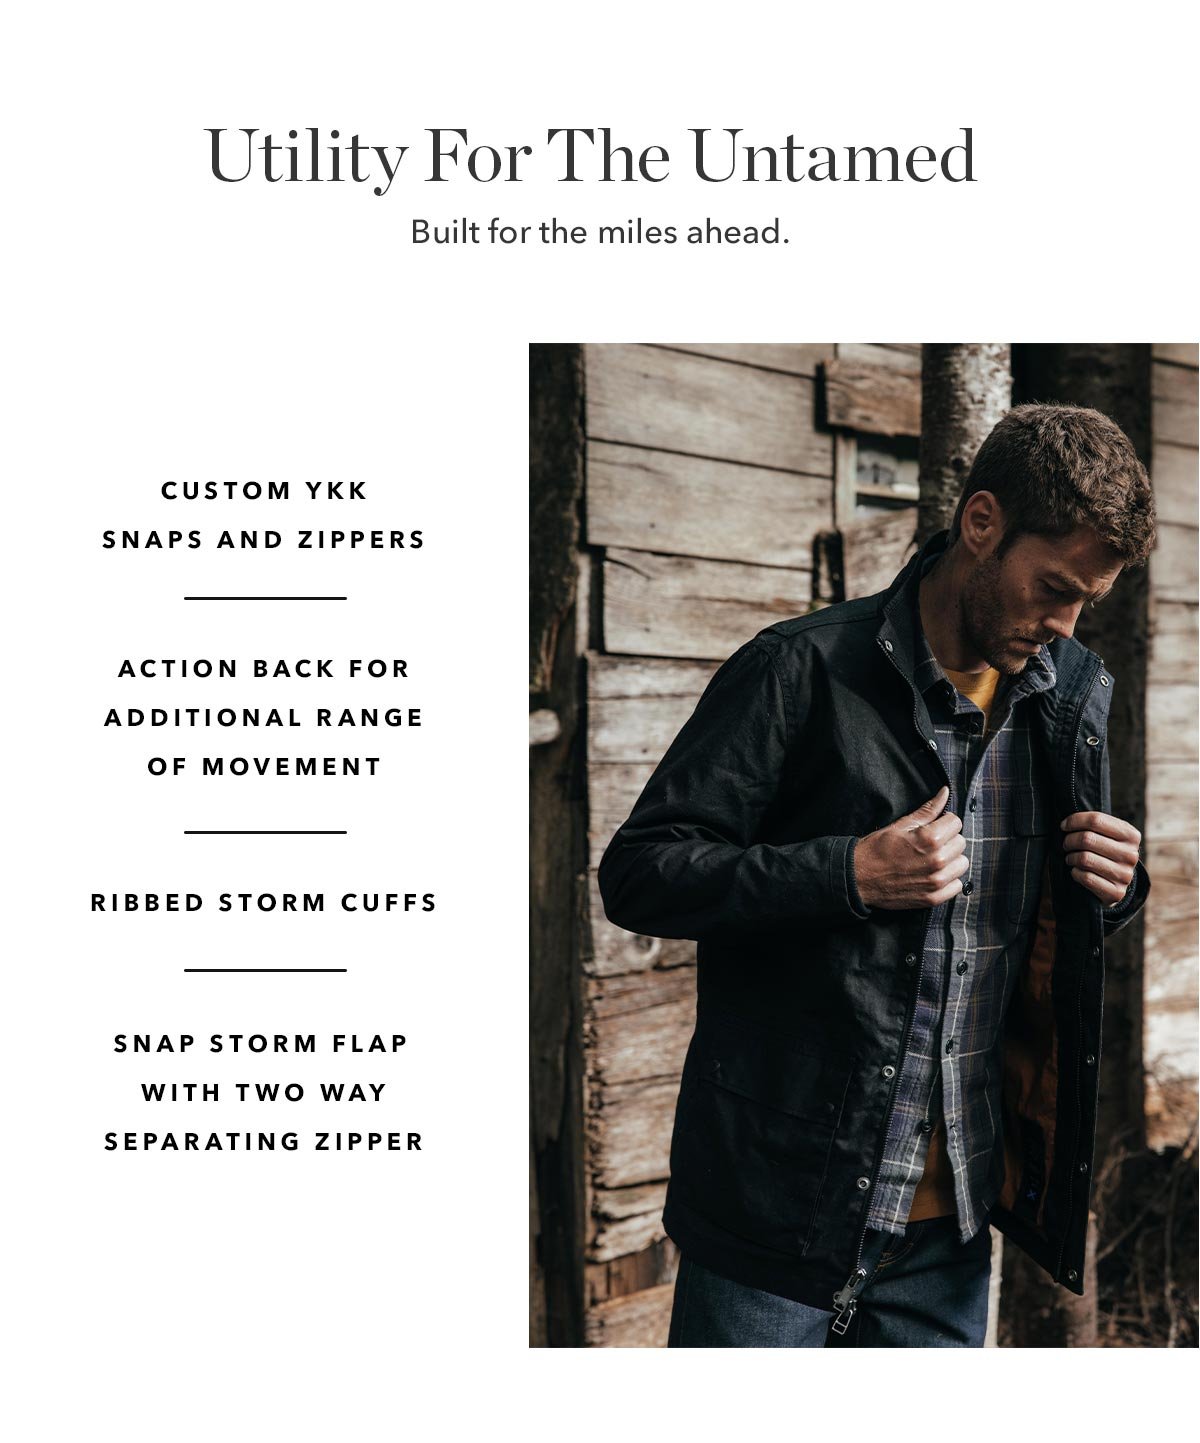 Utility For The Untamed: Built for the miles ahead.   Snap storm flap with two way separating zipper. Custom YKK snaps and zippers. Ribbed storm cuffs. Action back for additional range of movement.